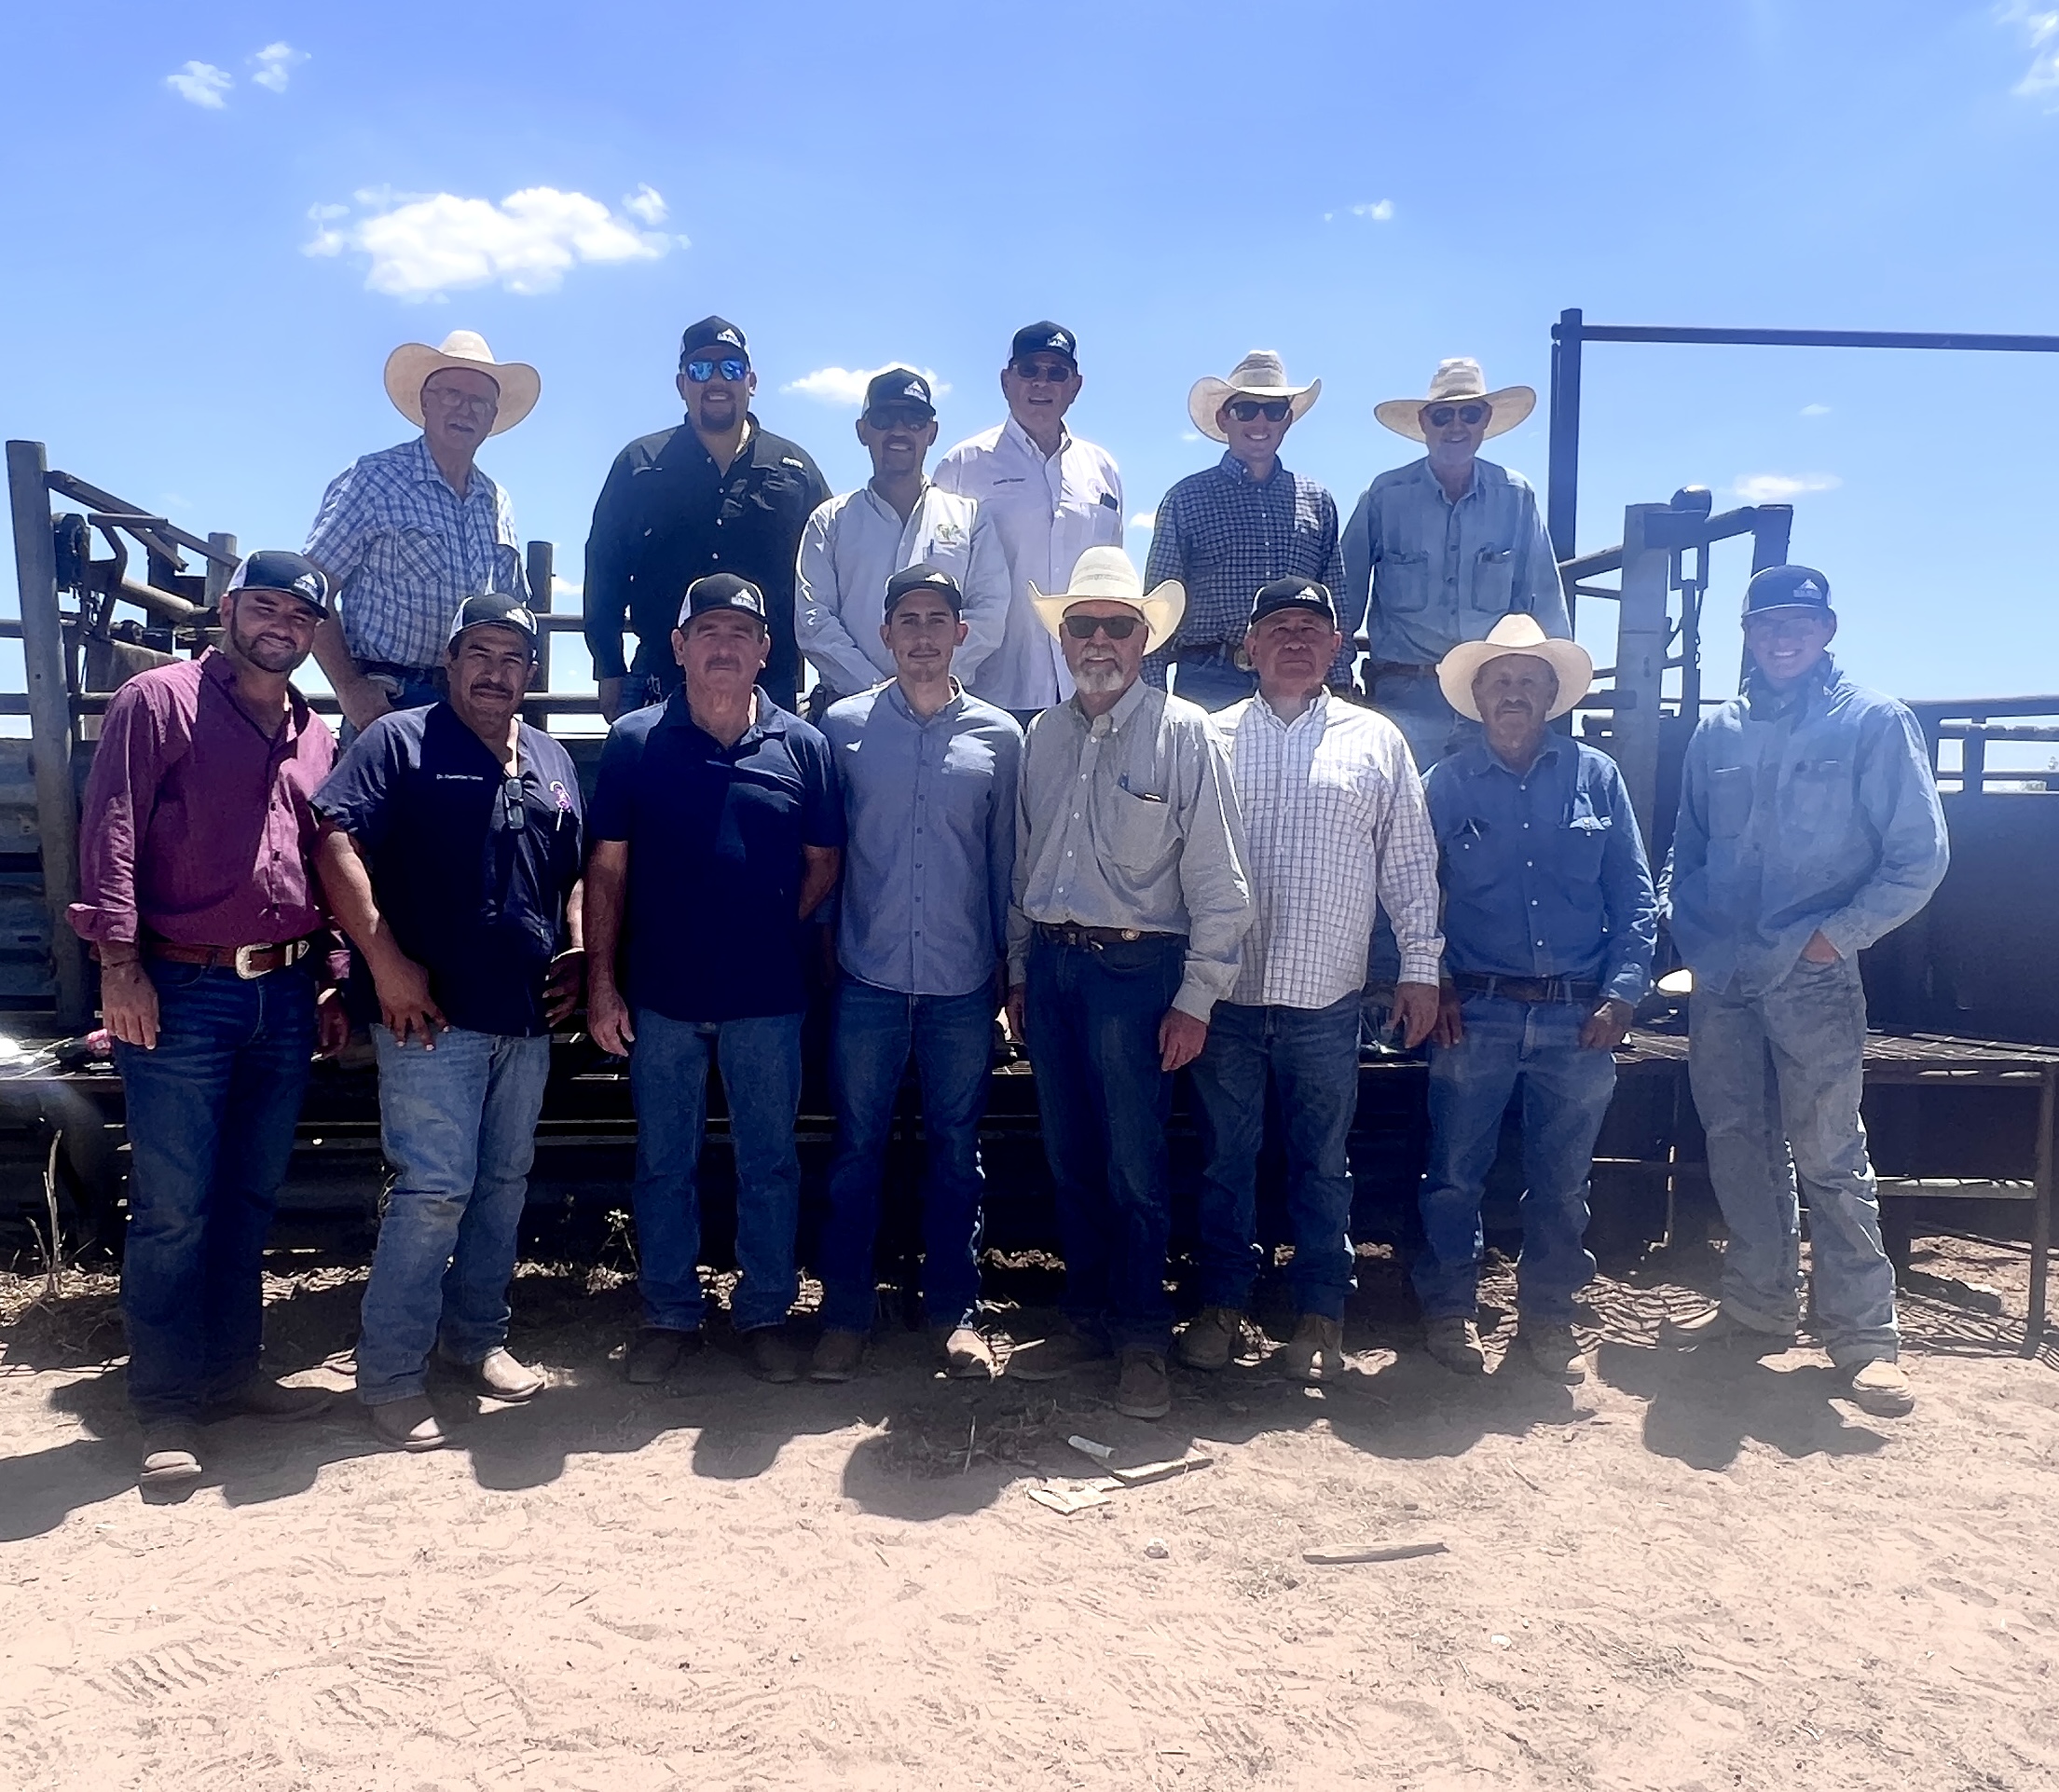 Fourteen men stand in a group posing for a photo outside a cattle pen.